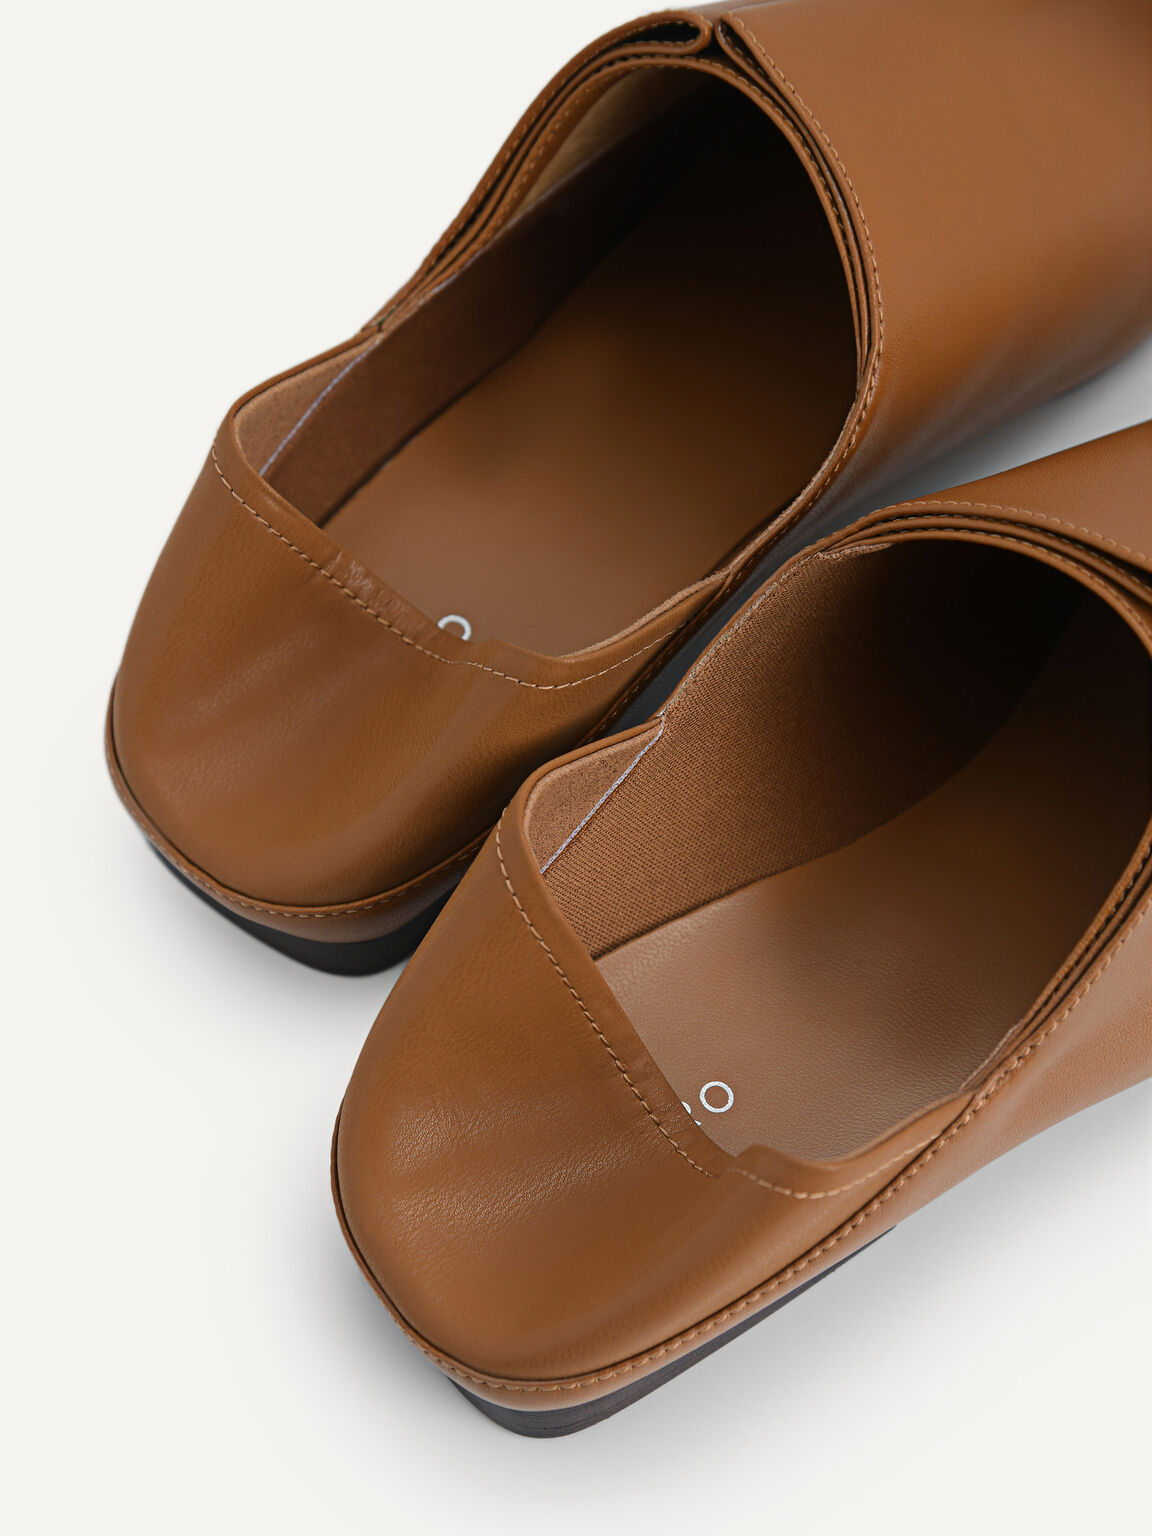 Orb Leather Flats, Camel